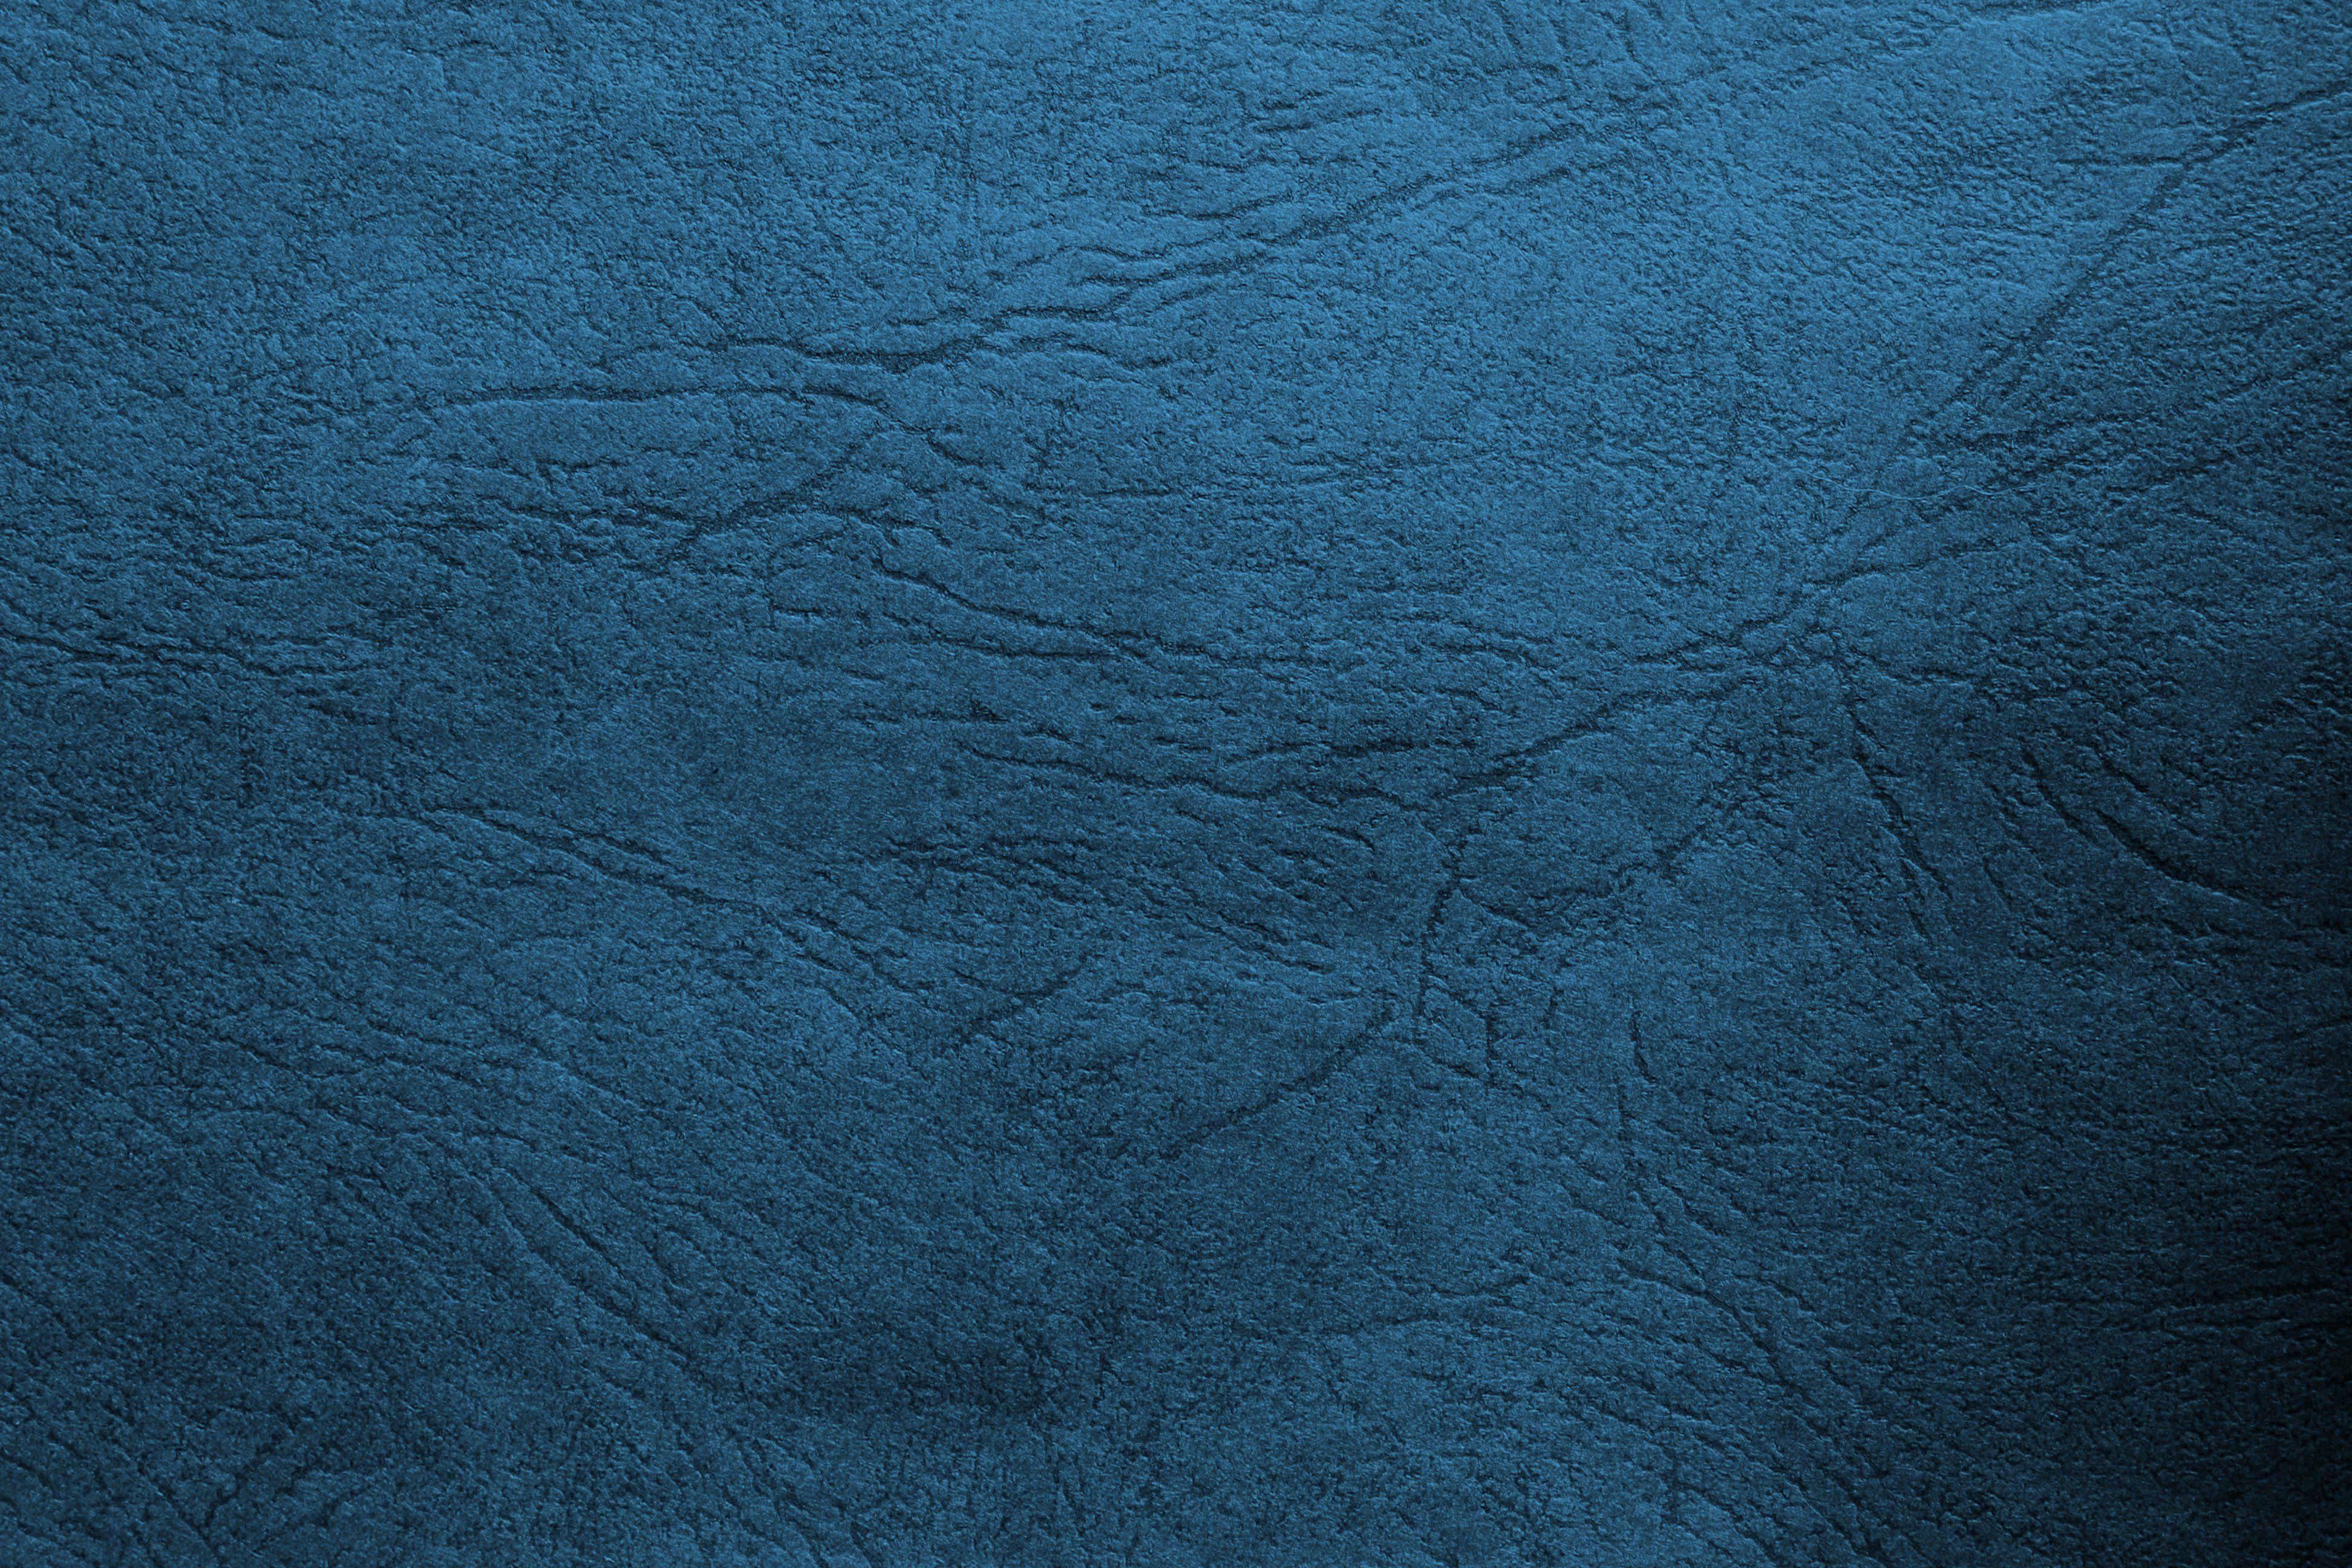 Light Blue Leather Texture Picture Free Graph Public Wallpaper. Leather texture, Blue texture, Linen paper texture